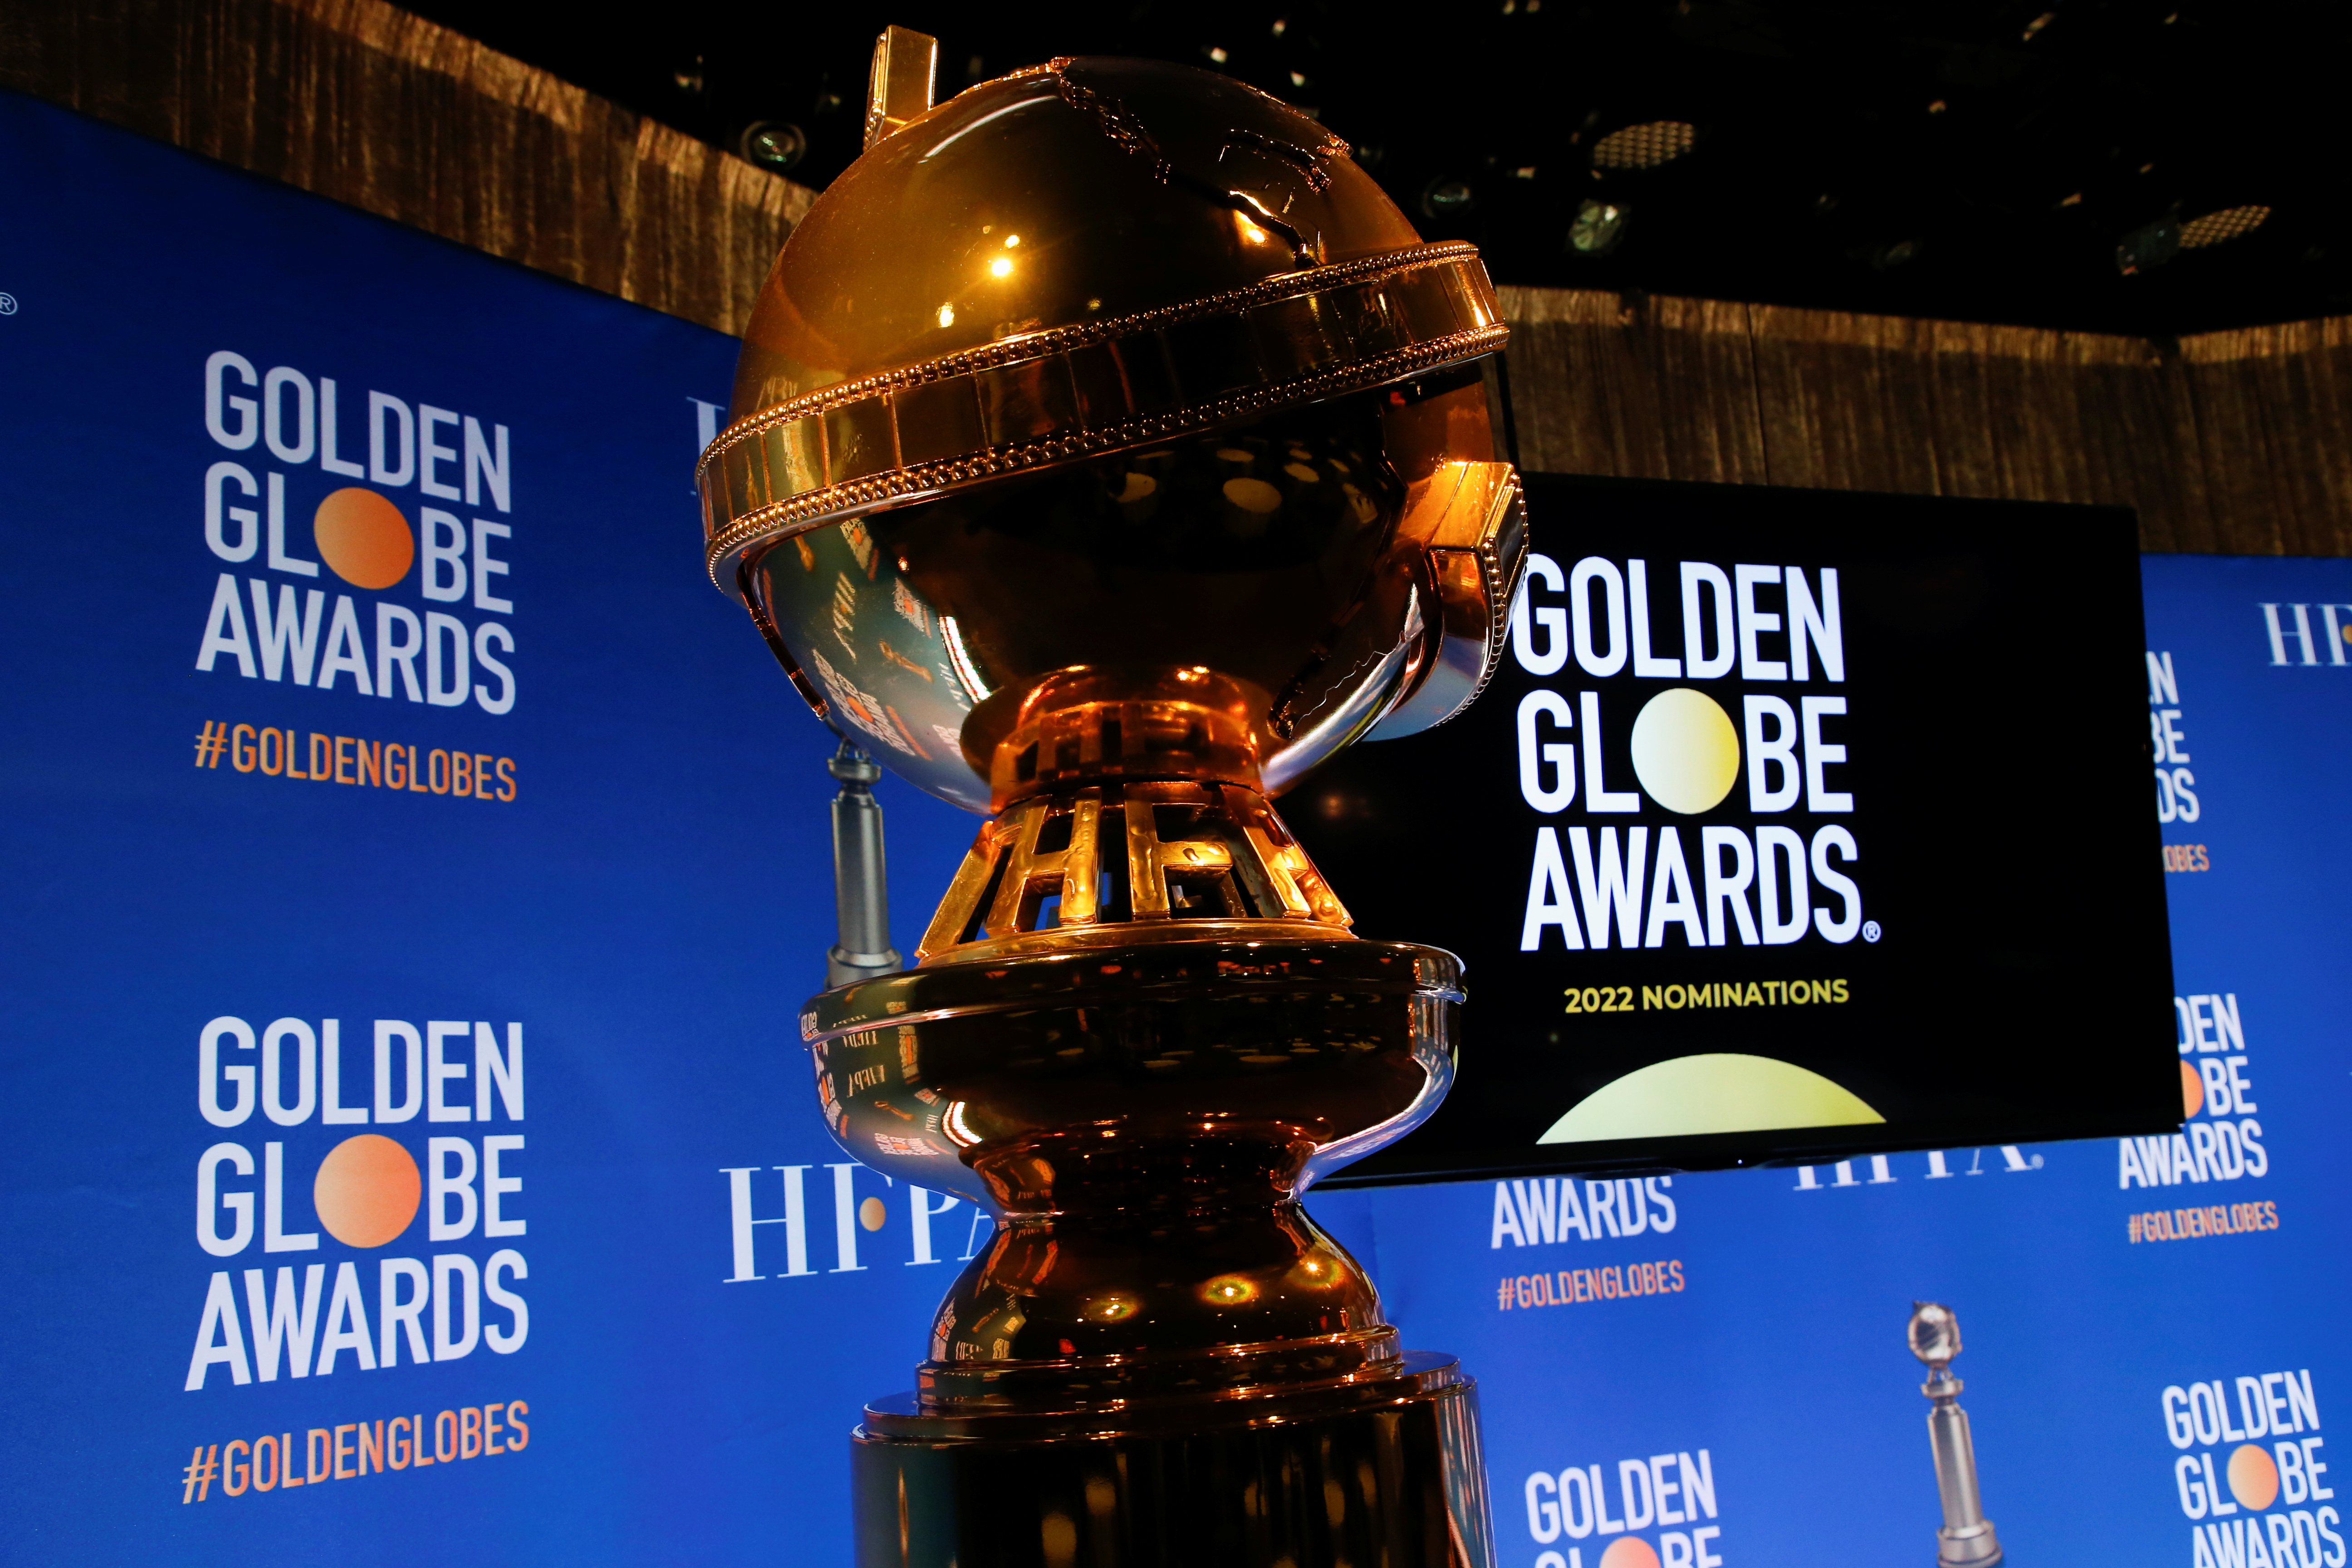 79th Annual Golden Globe Awards nominations announcement in Beverly Hills, California